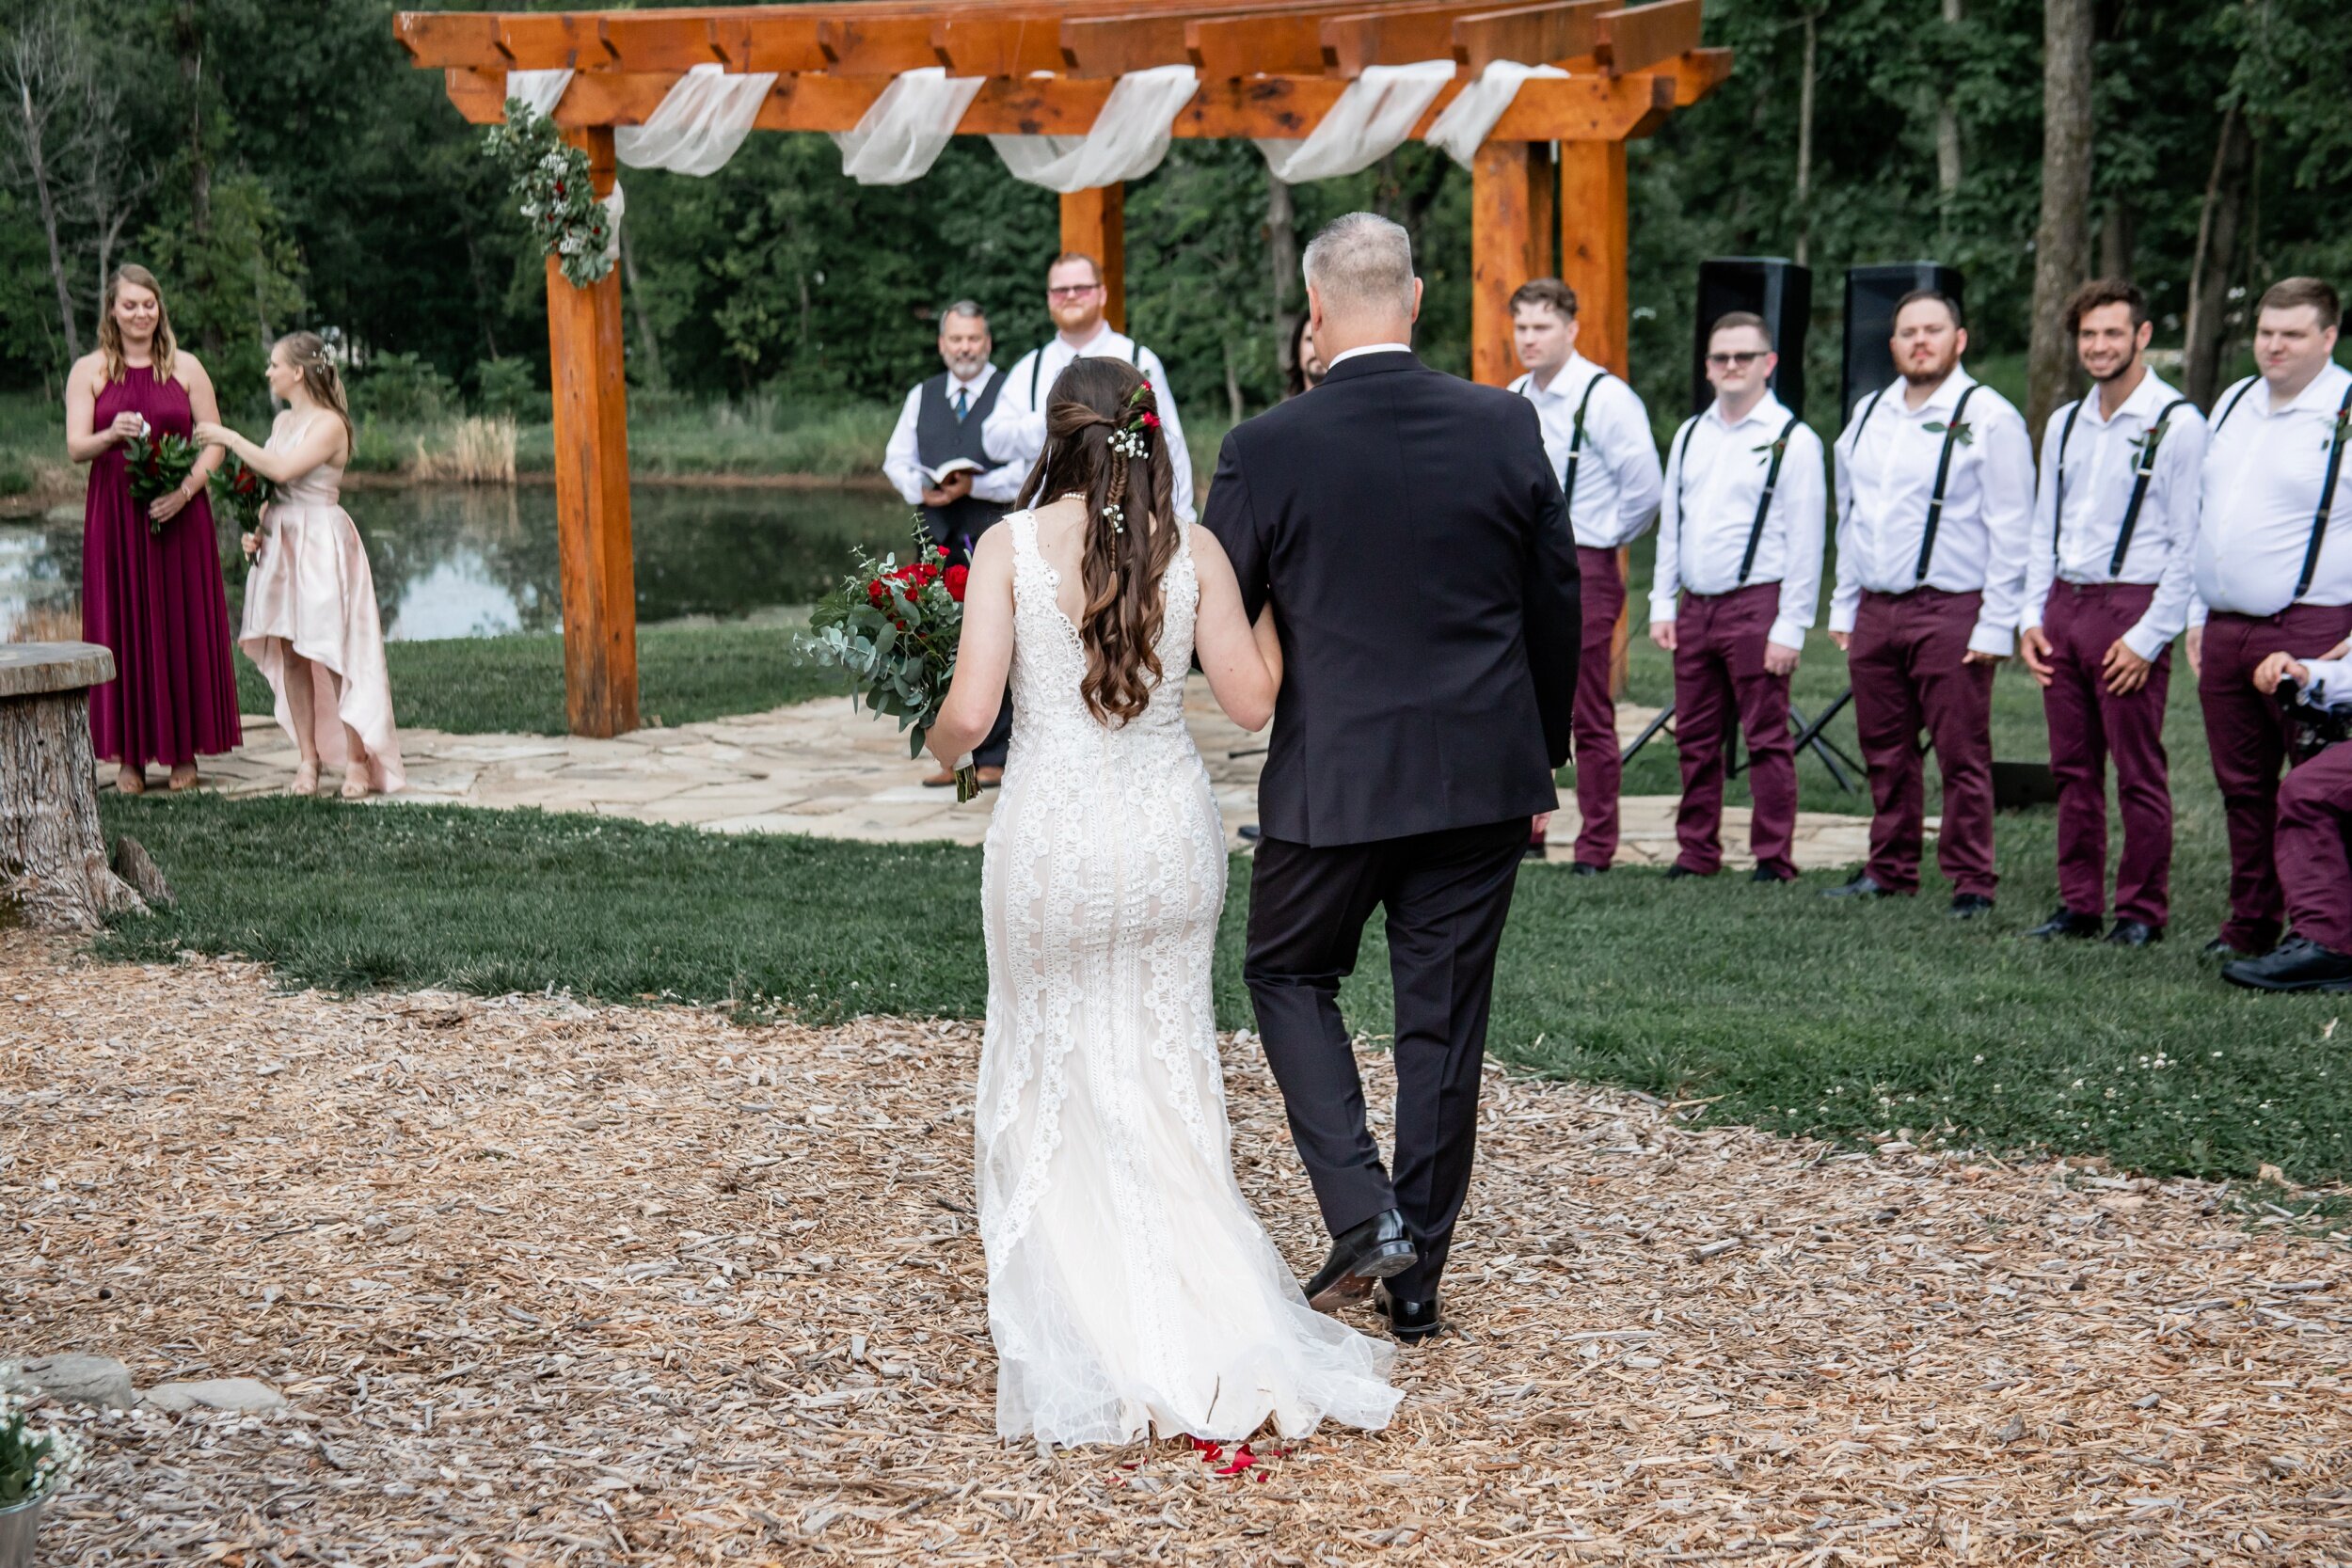 Summer Outdoor Wedding Photography at Stockton Lake by Merry Ohler - 20